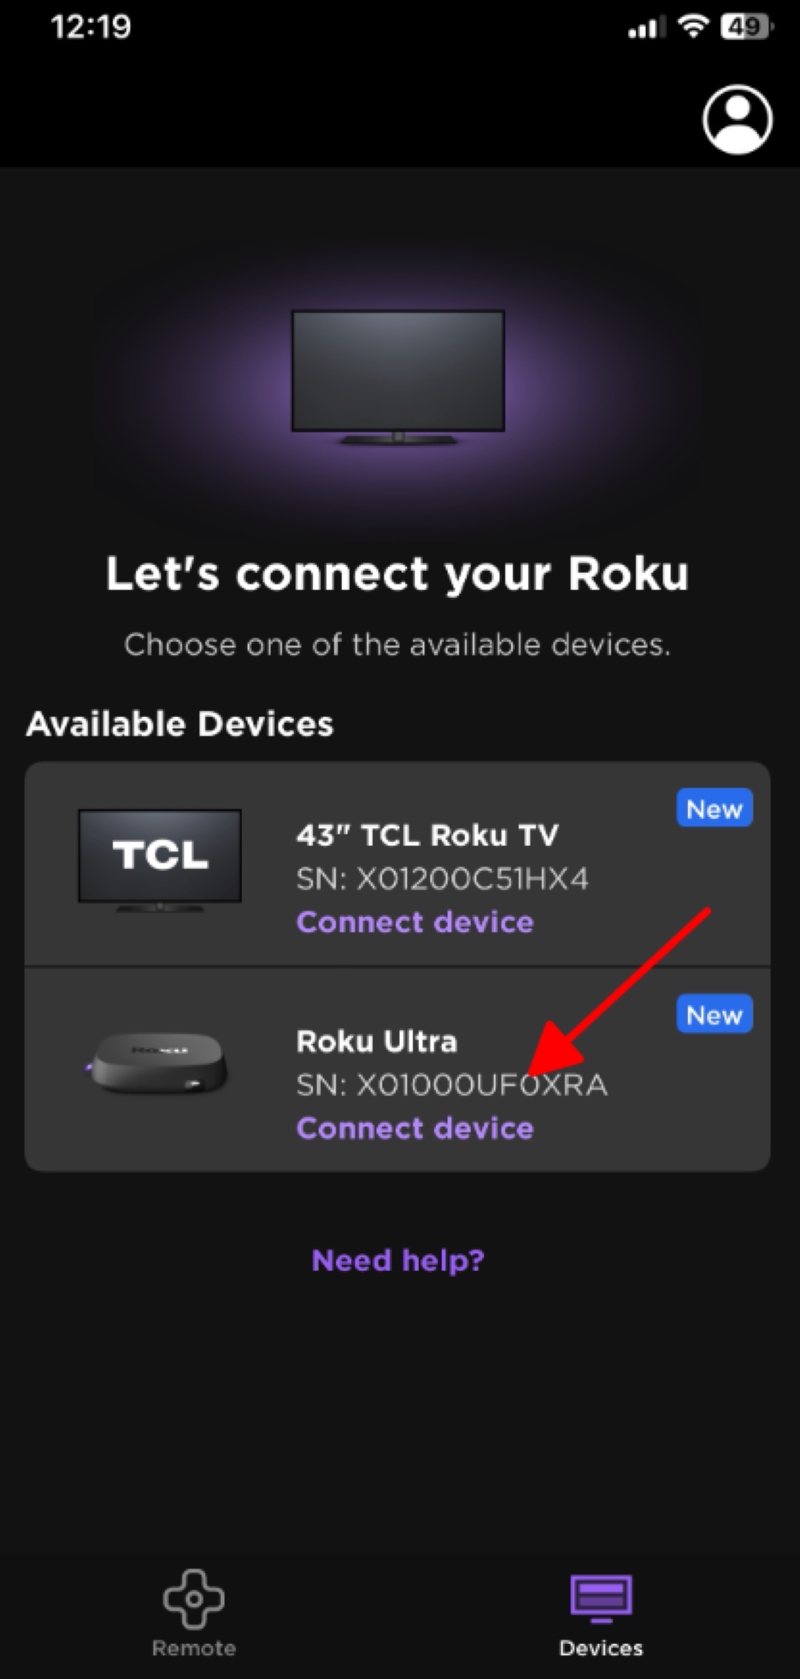 select Roku Ultra to connect to the Roku mobile app